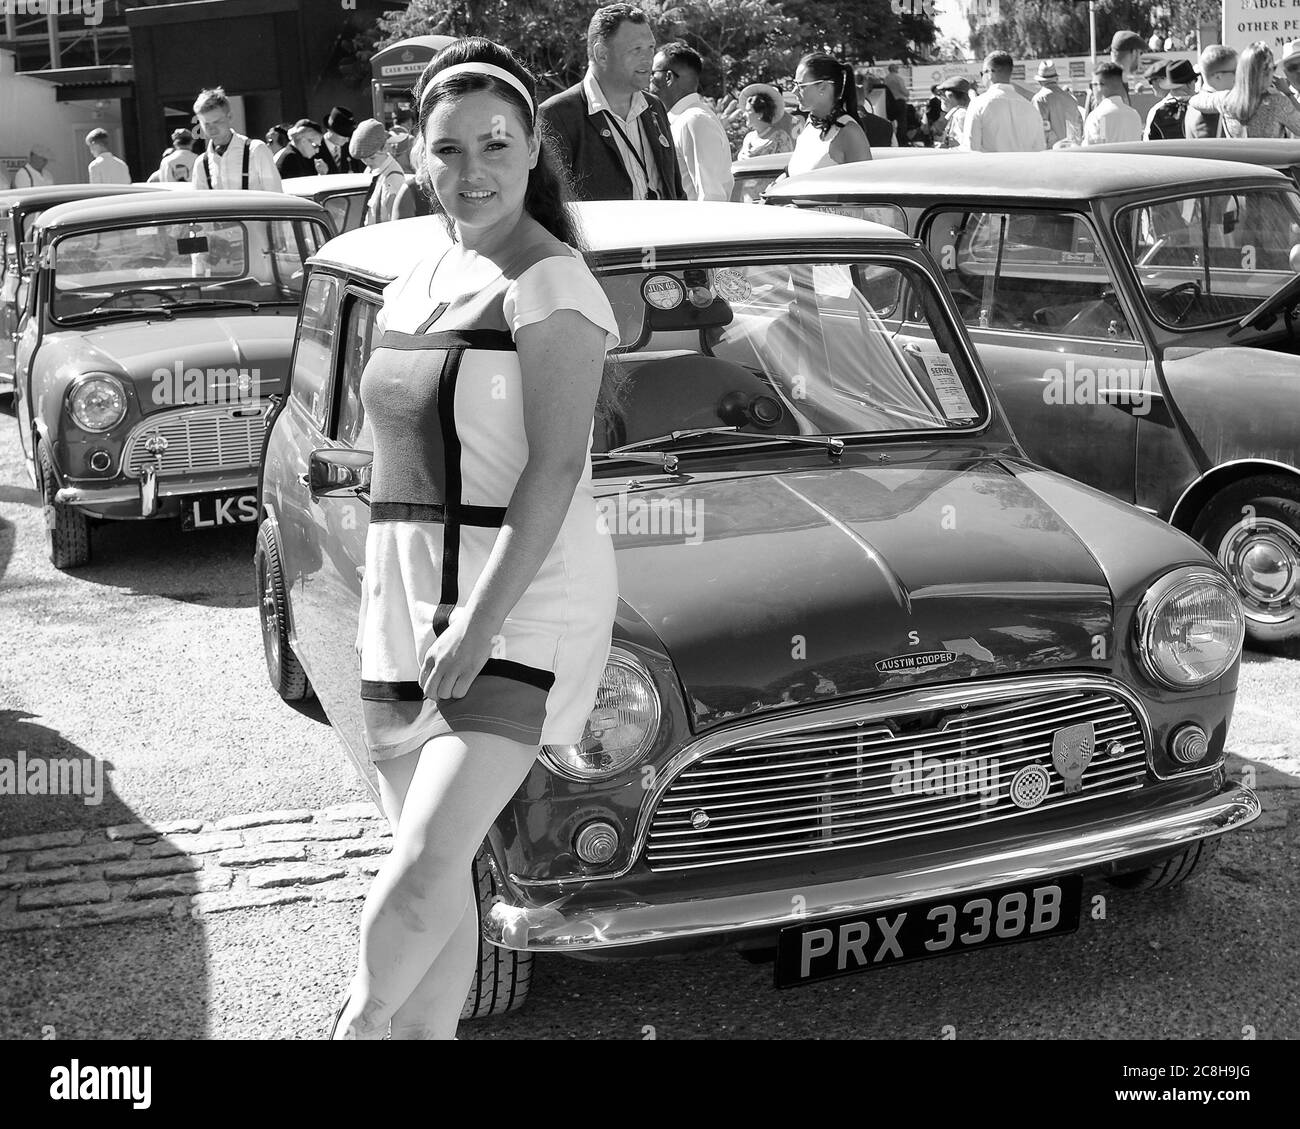 September 2019 - An actor model posing beside a Mini Cooper S at The Goodwood Revival Stock Photo